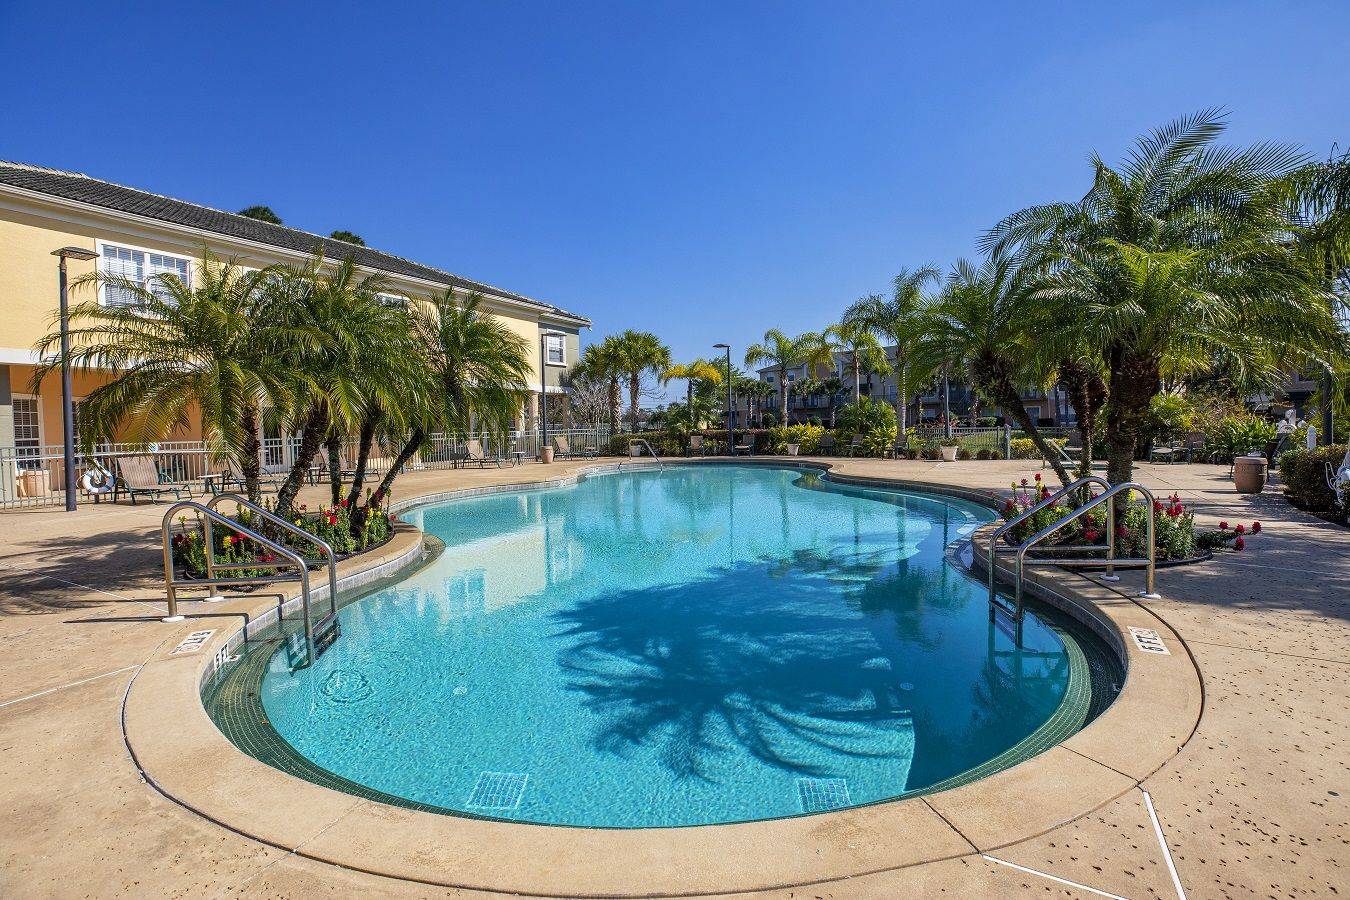 Robbins Property Associates Expands in Florida Market With The Acquisition of 308-Unit Wisper Palms Apartment Community in Orlando